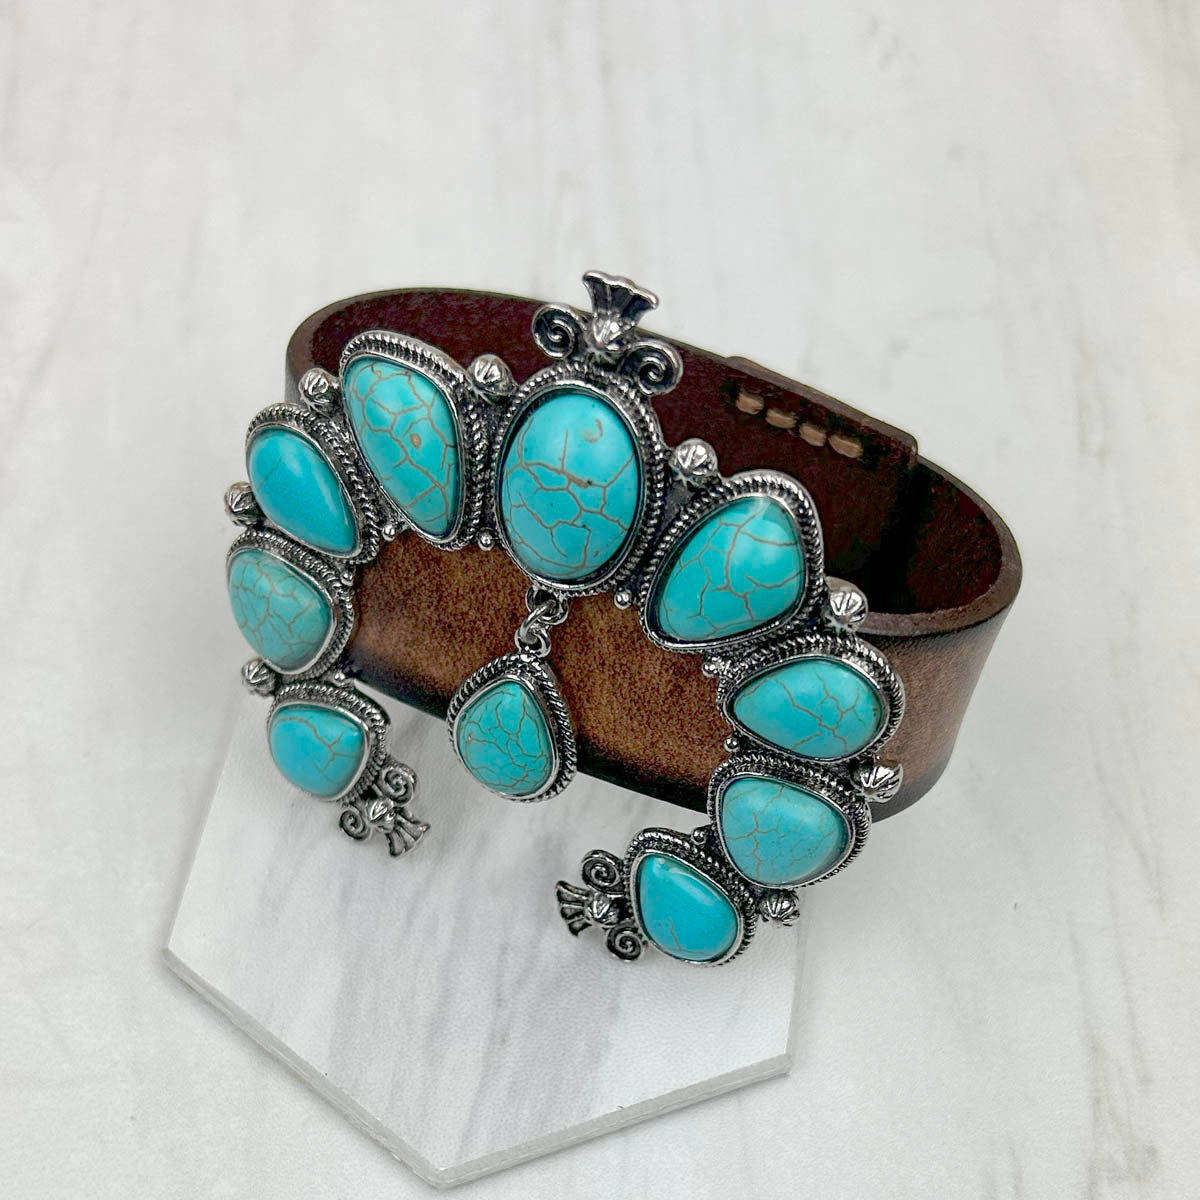 NKZ231226-08                 Brown leather with large blue turquoise blossom squash bracelet